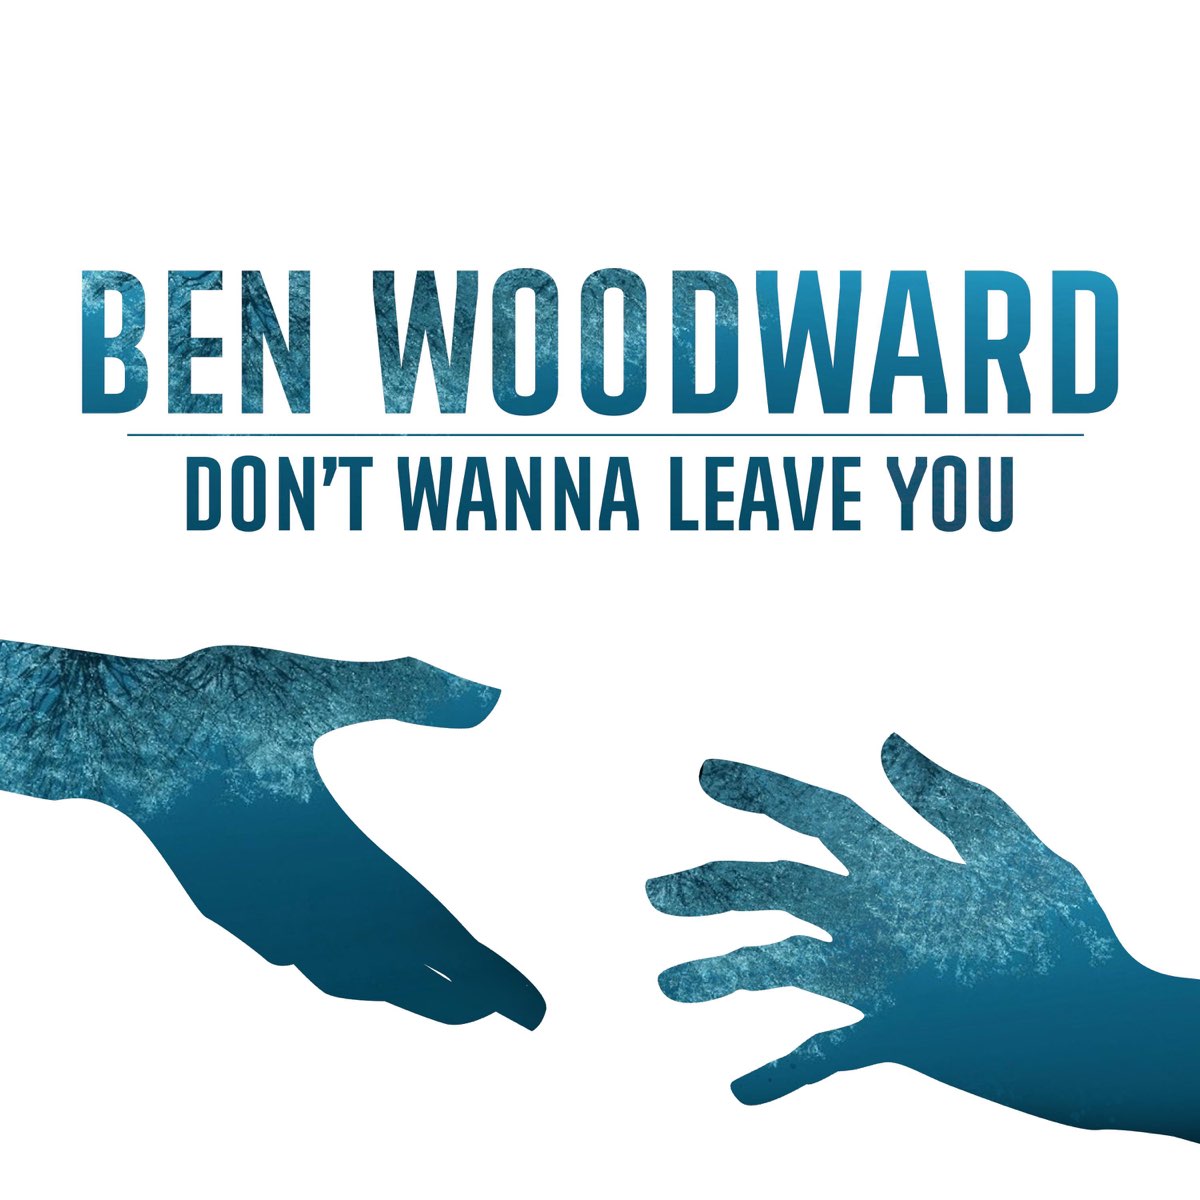 I wanna leave you. Ben Woodward- don't wanna leave youаниме. I don't wanna leave. Don't wanna leave you anymore.